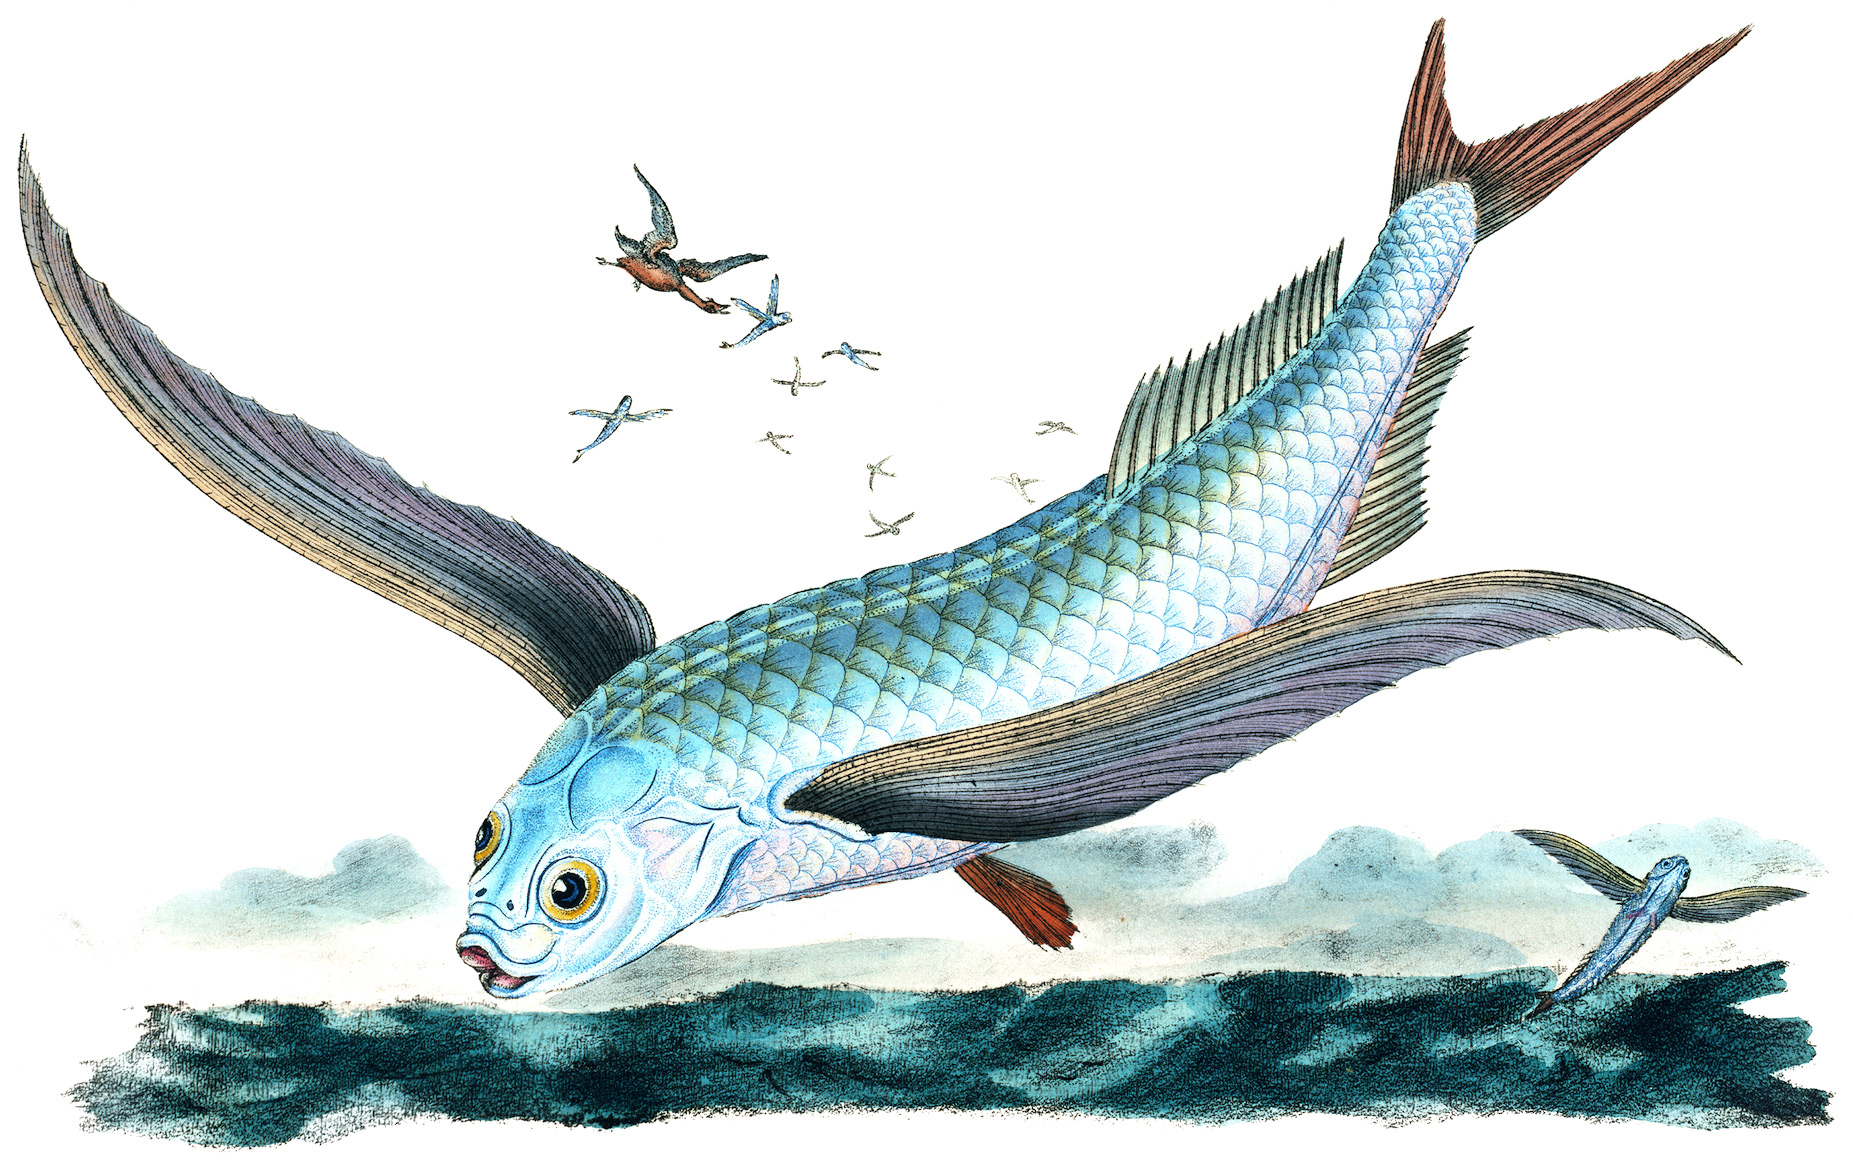 Classic flying-fish illustration from The Natural History of British Fishes (1802) by Edward Donovan